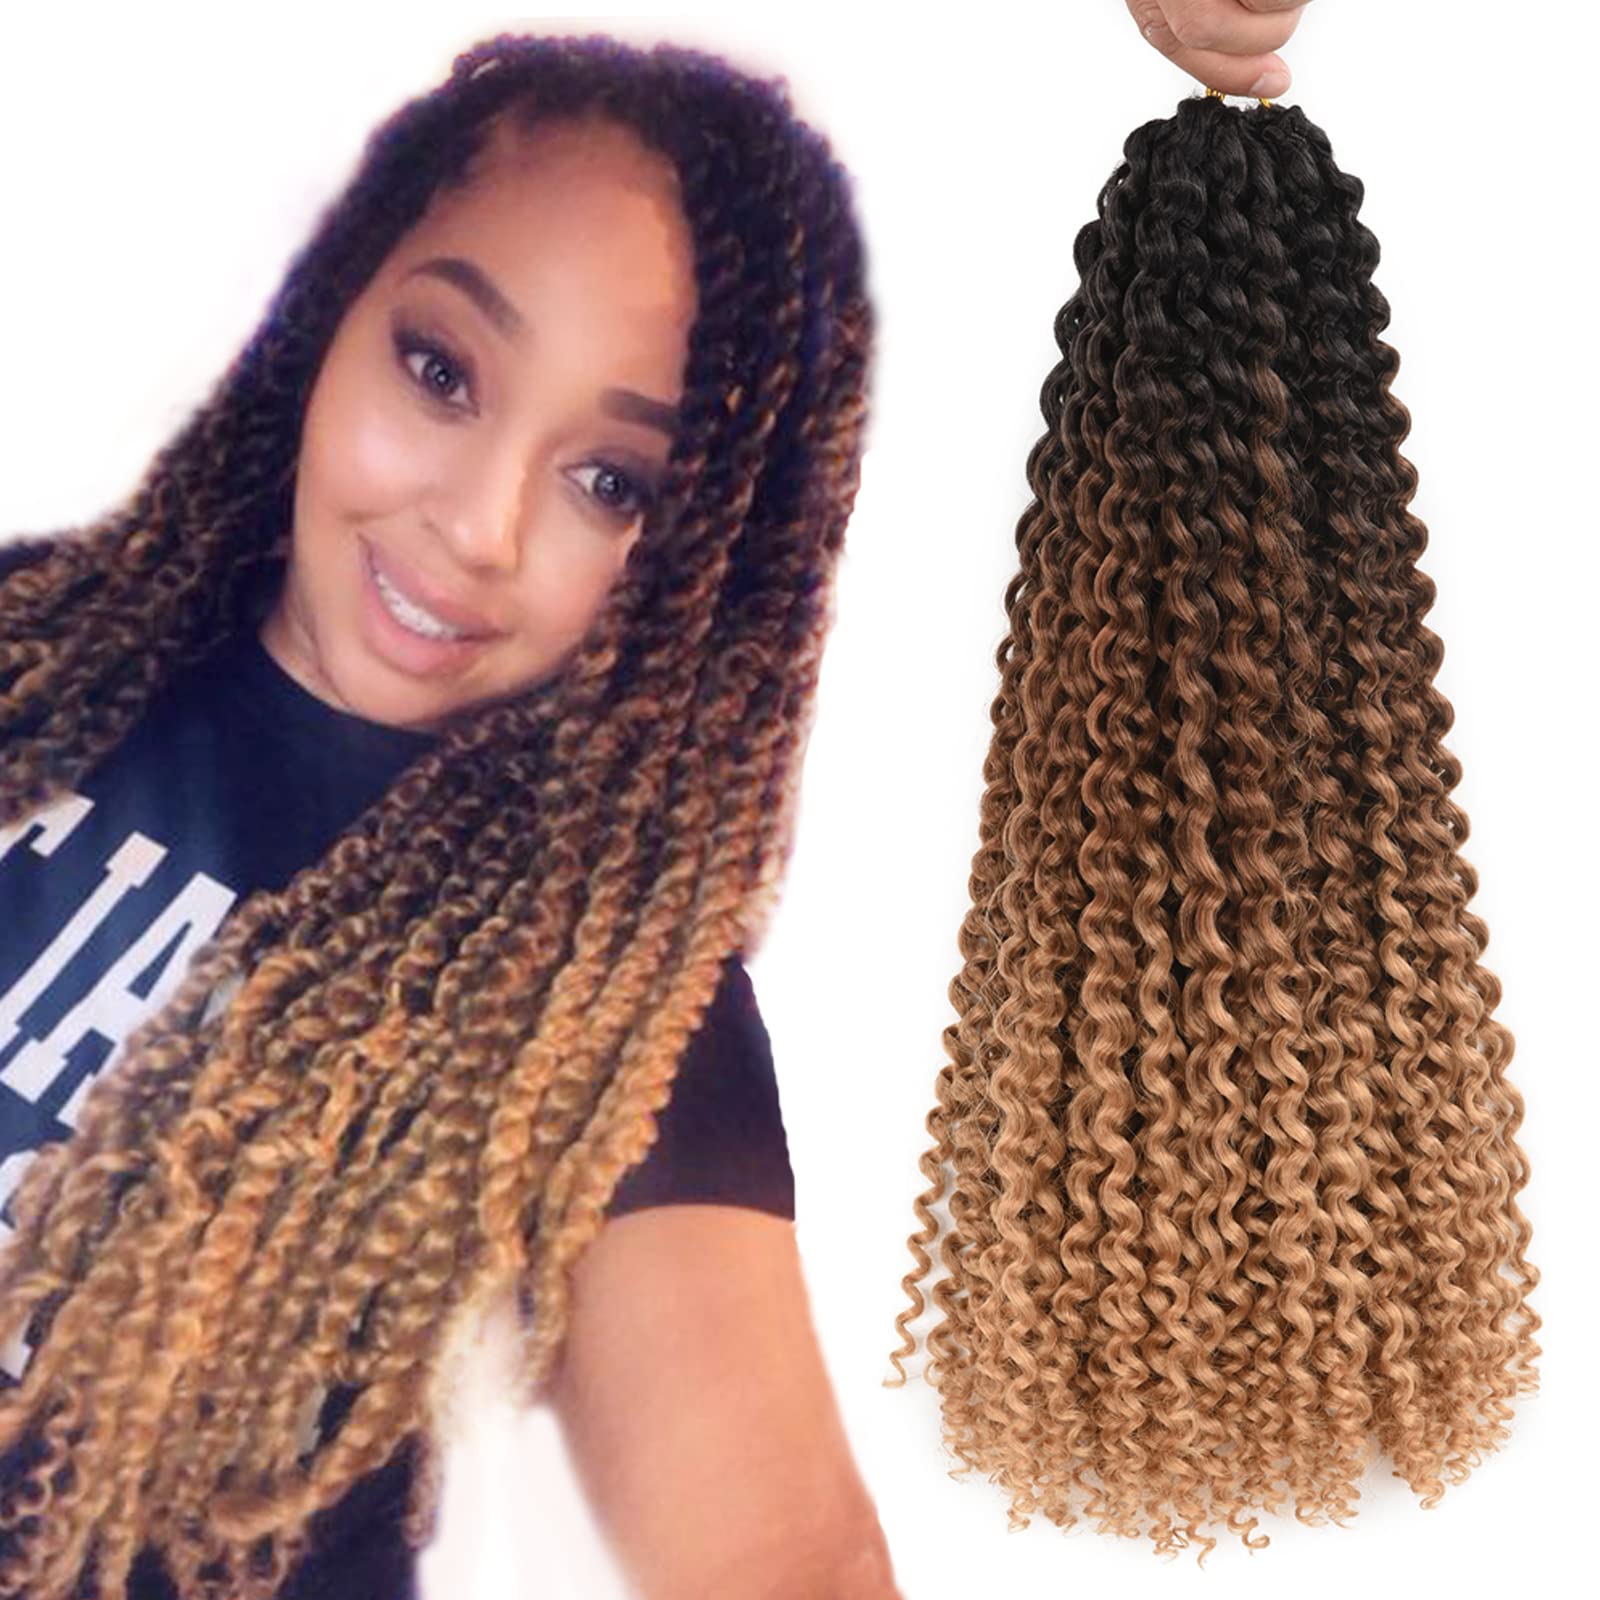 Passion Twist Hair Water Wave Crochet Hair For Black Women 18 Inch 6 Packs  Passion Twists